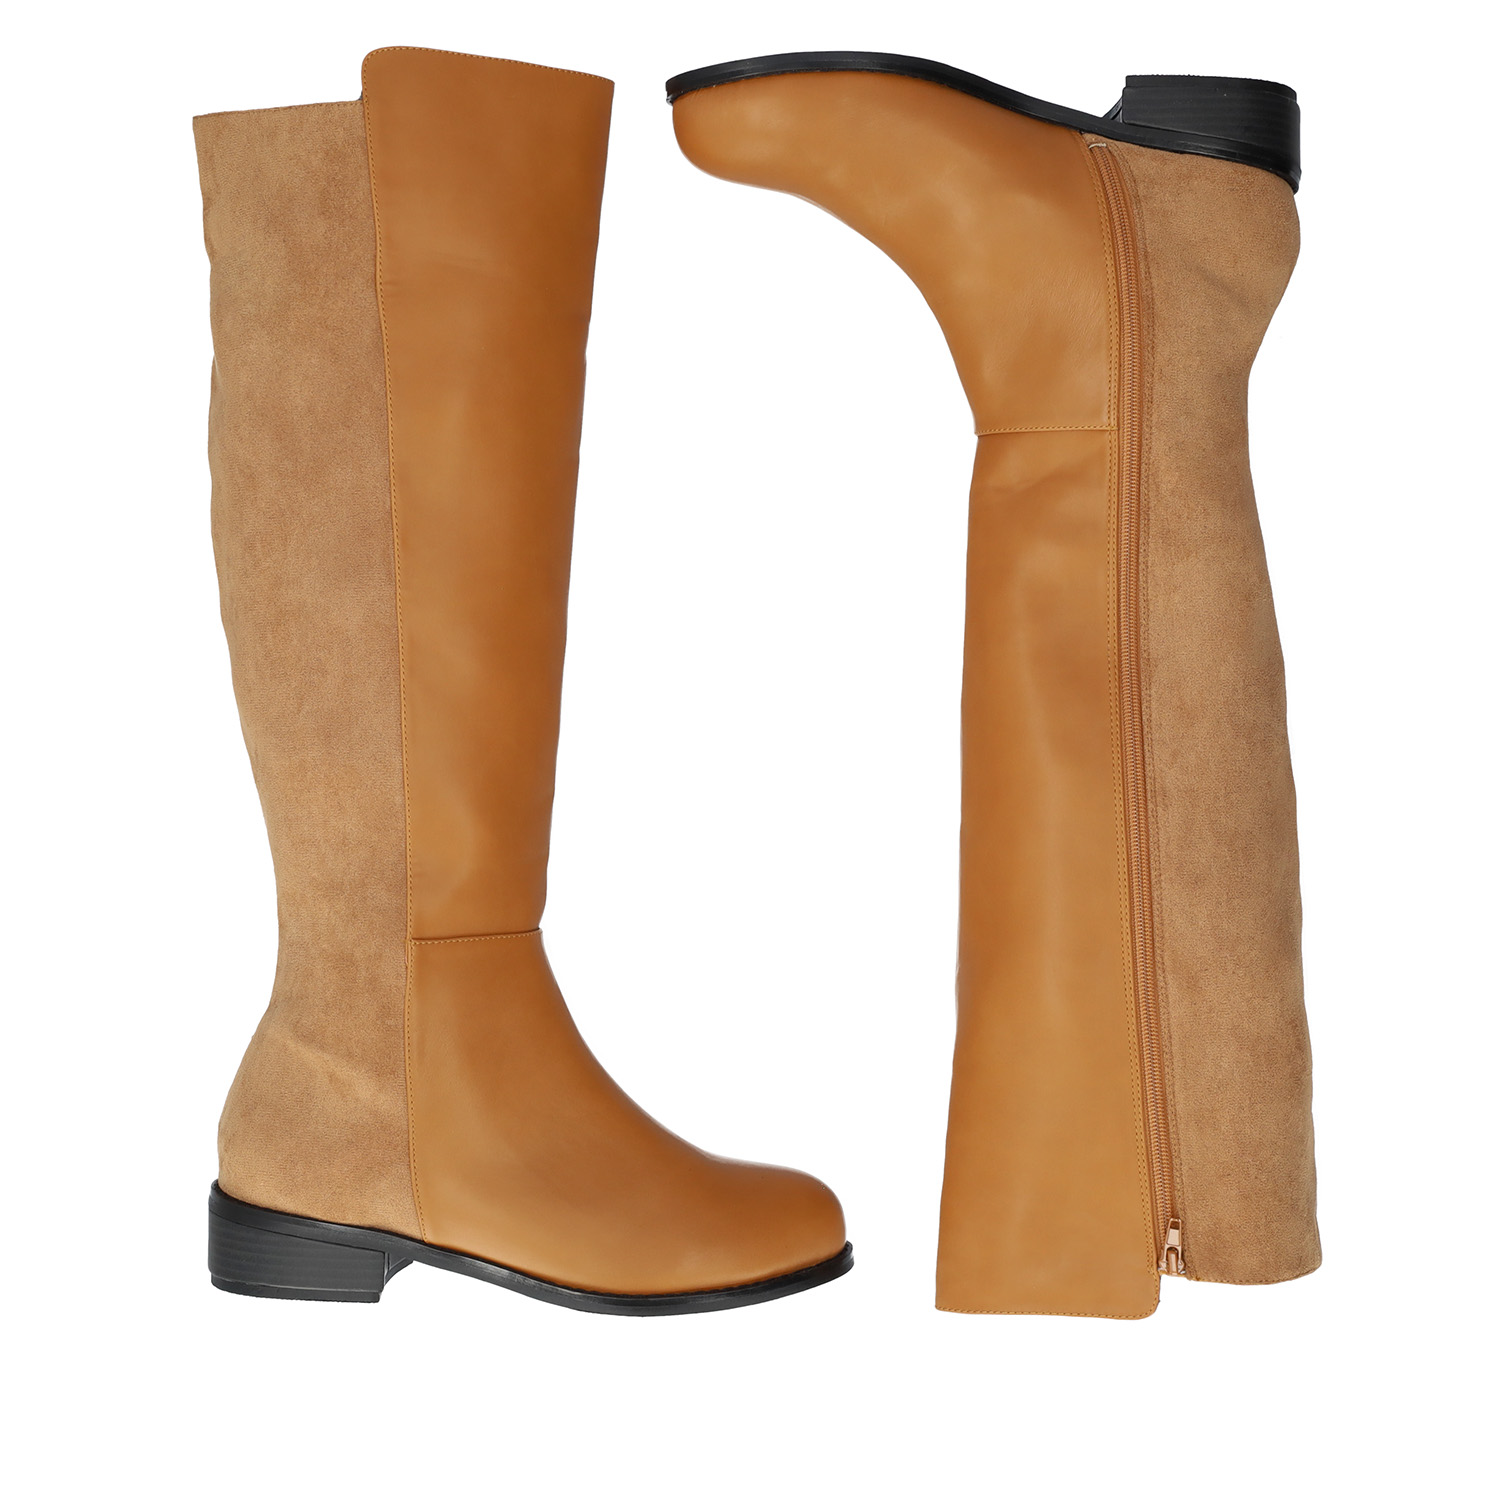 Flat knee-high boots combined in camel colour. 